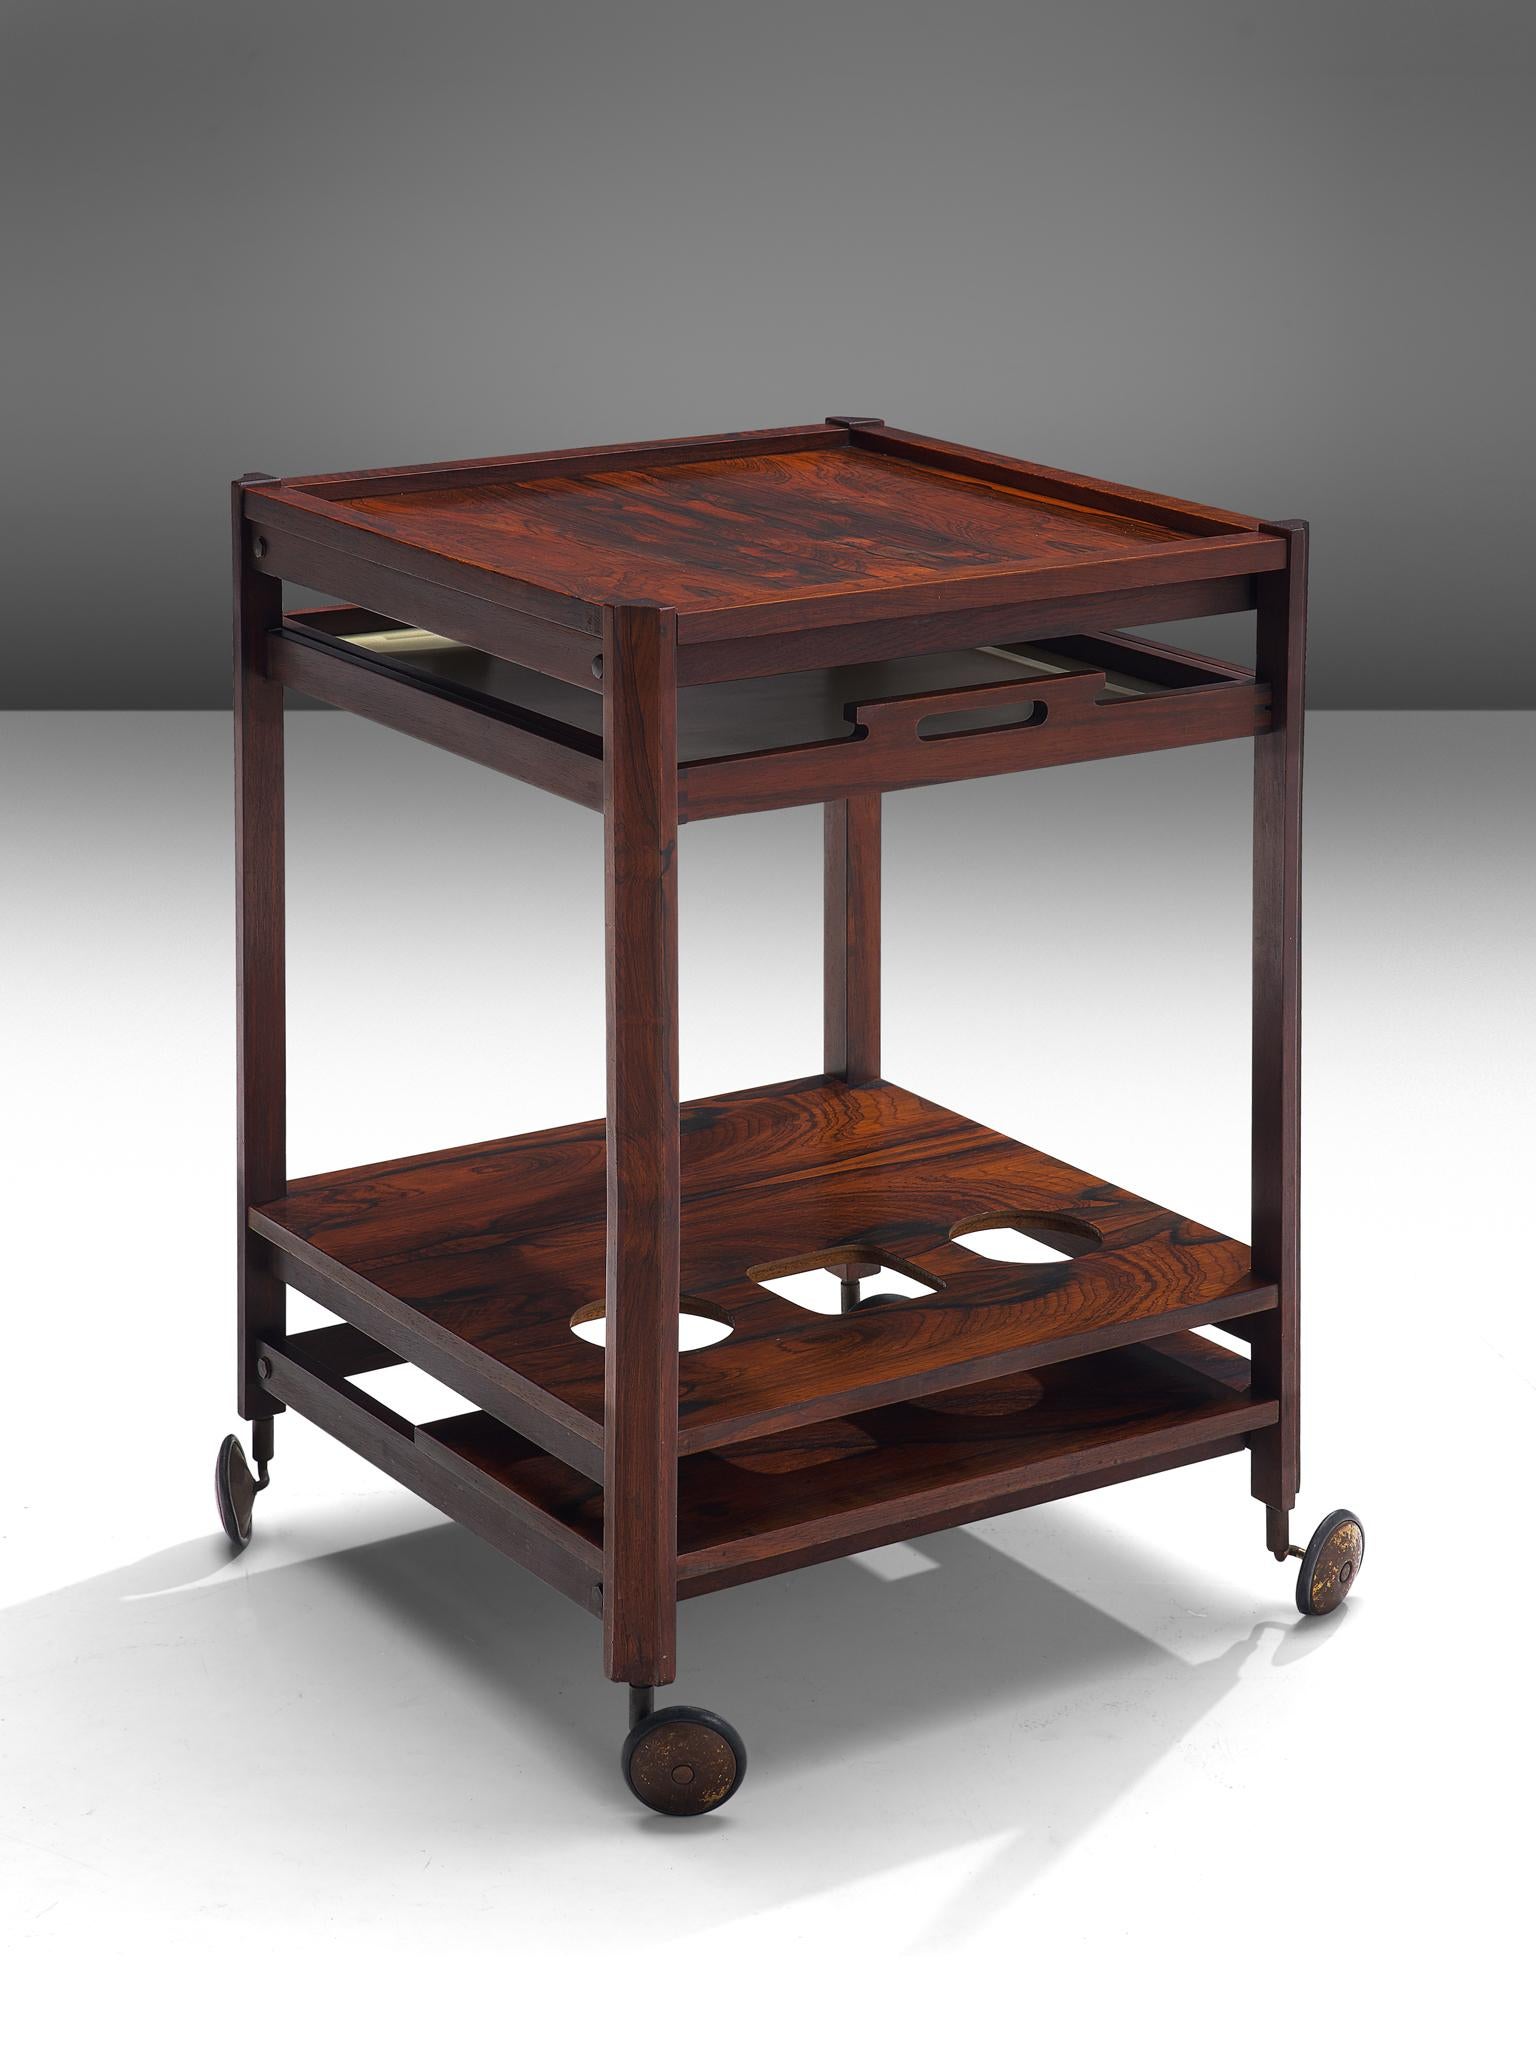 Trolley, rosewood, metal, Italy, 1960s.

This bar cart has been completely executed in rosewood veneer, resting on elegant brass wheels. The piece has several levels, with one pull-out tray and a tray with cut-outs to place bottles. The natural